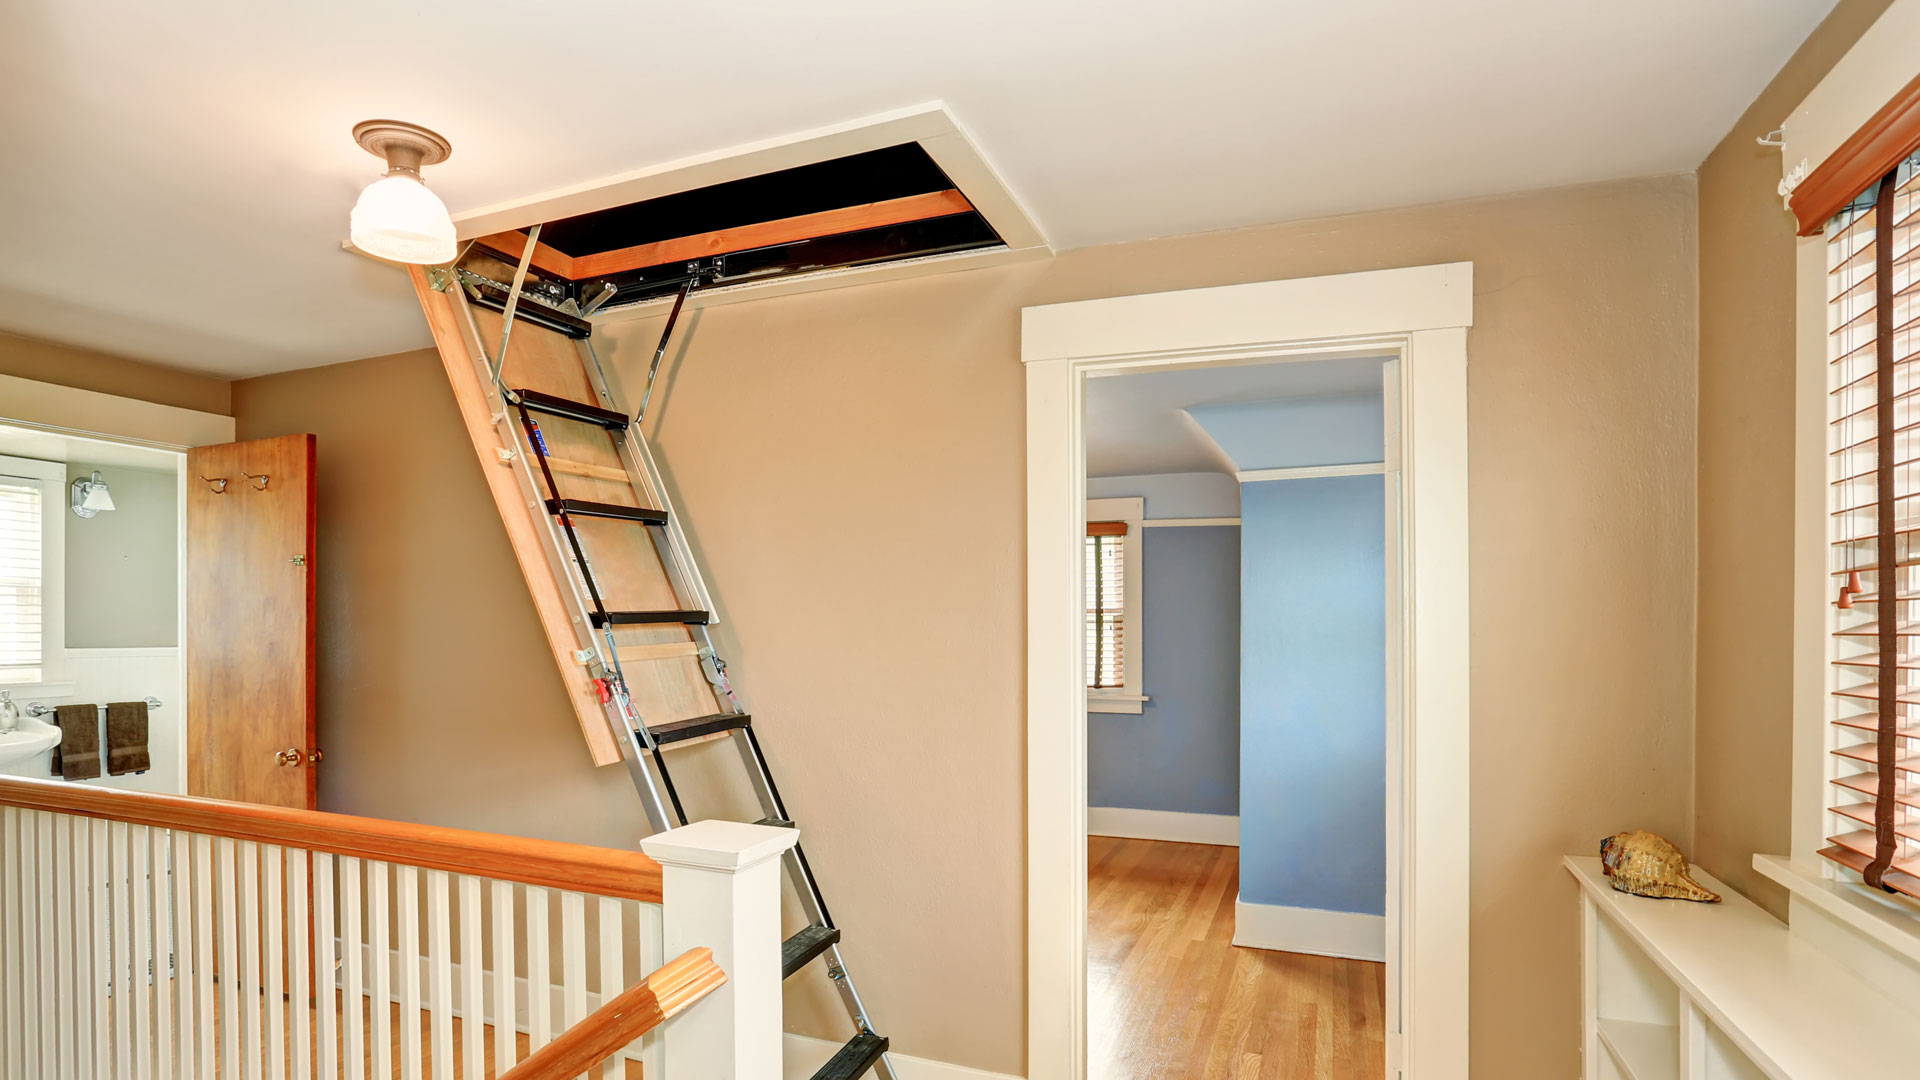 Attic Stair Spring In Home Feature Ajax Wire And Spring